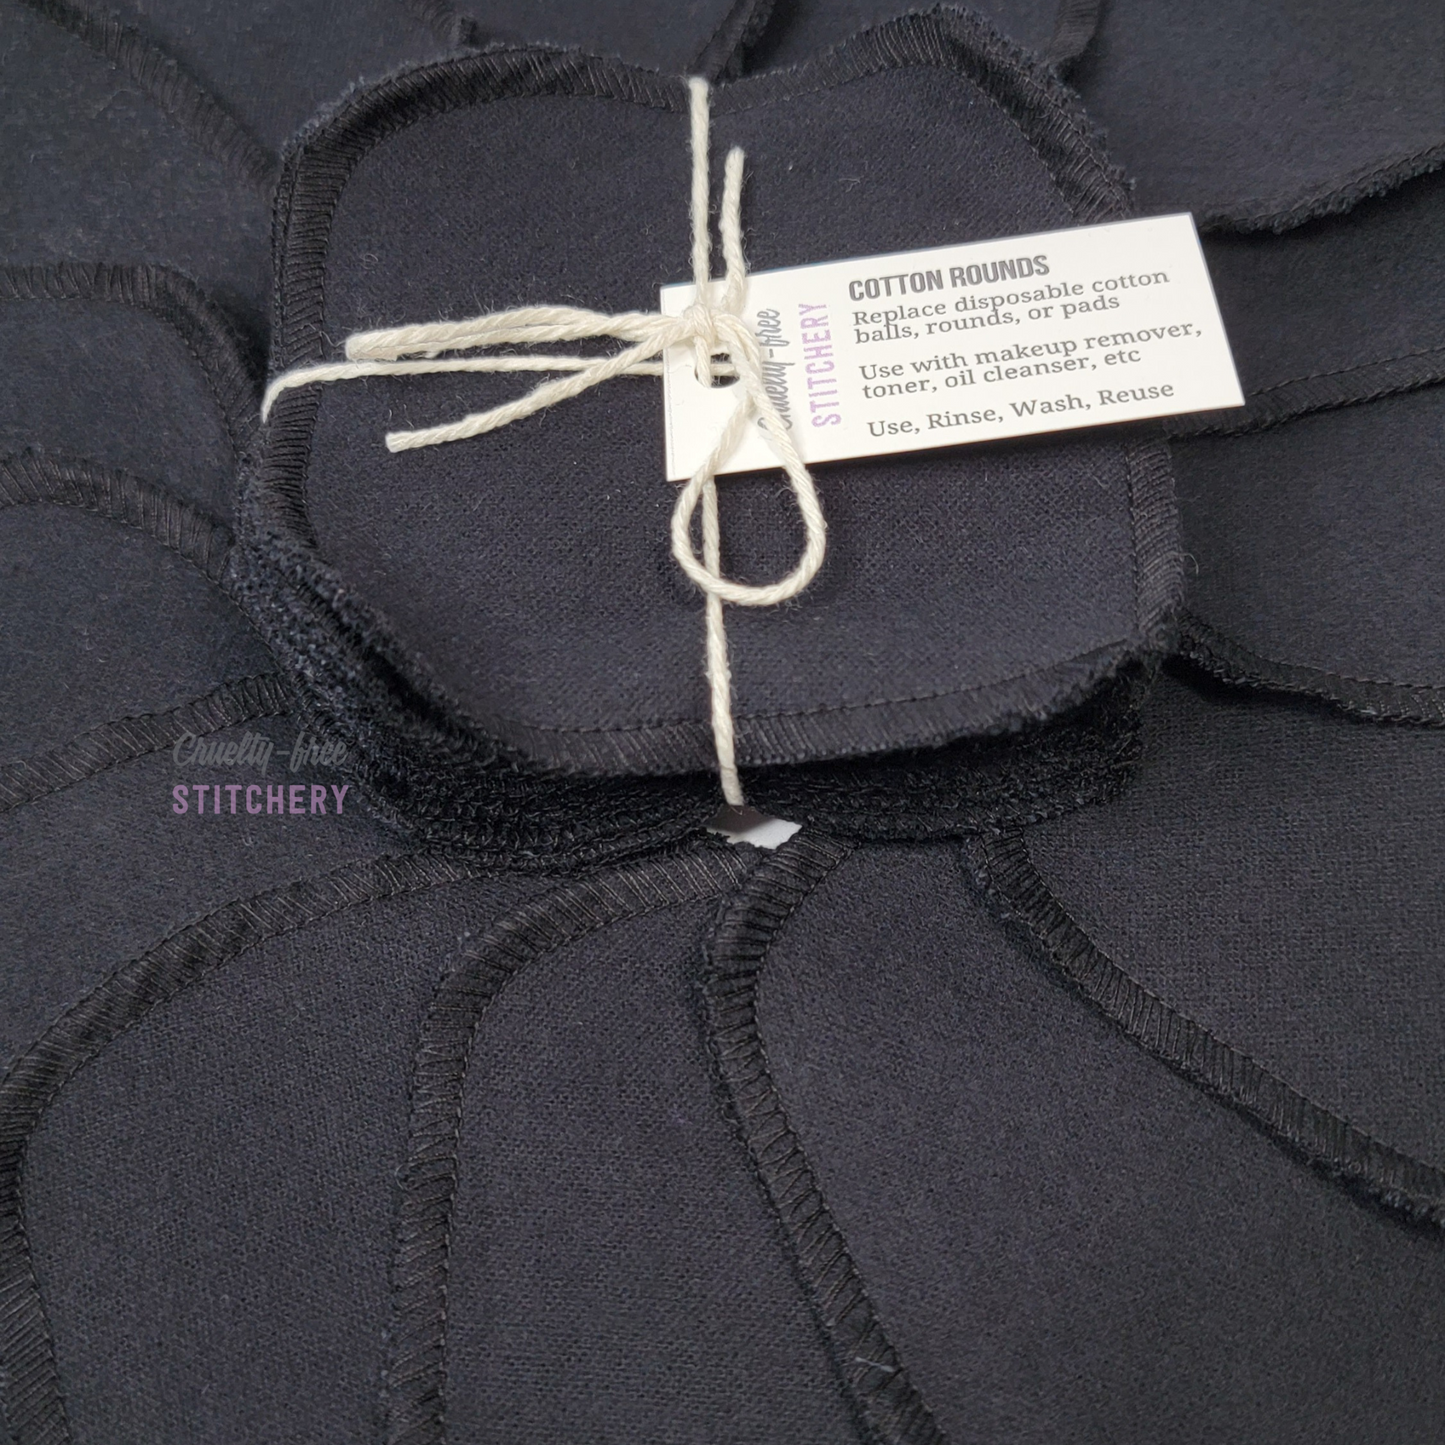 Close-up of the black reusable cotton rounds. They are a rounded square shape.